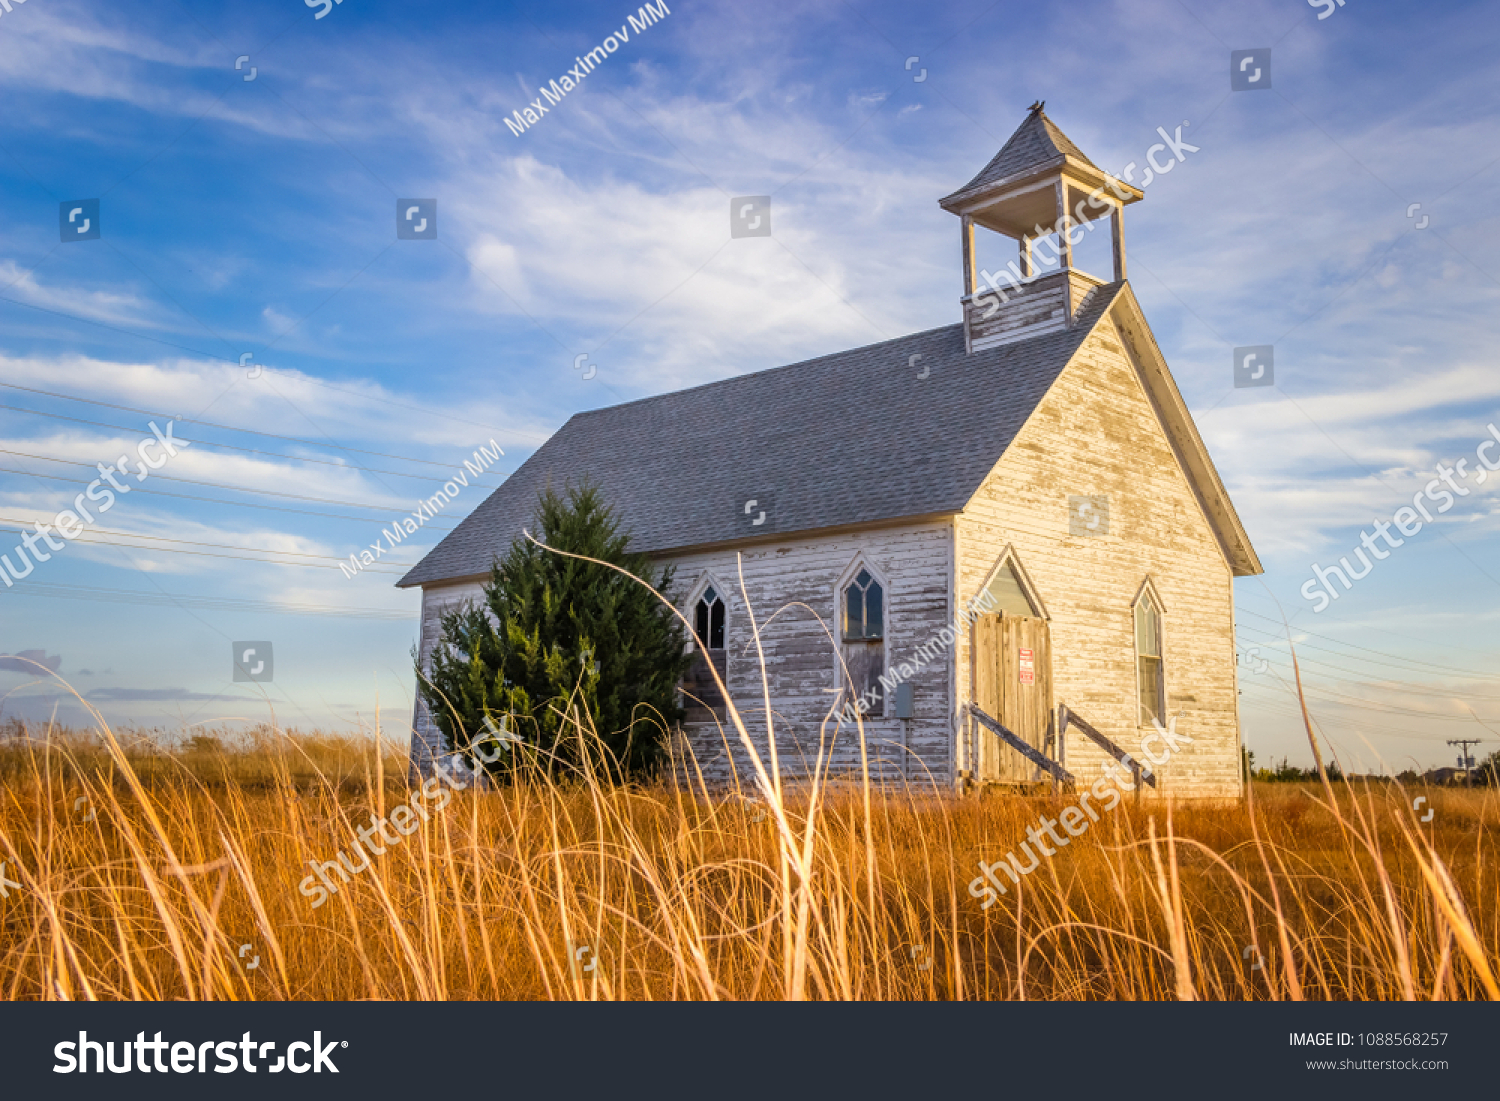 Abandoned Wooden Church Building in the Midwest Prairie under Blue Summer Sky #1088568257